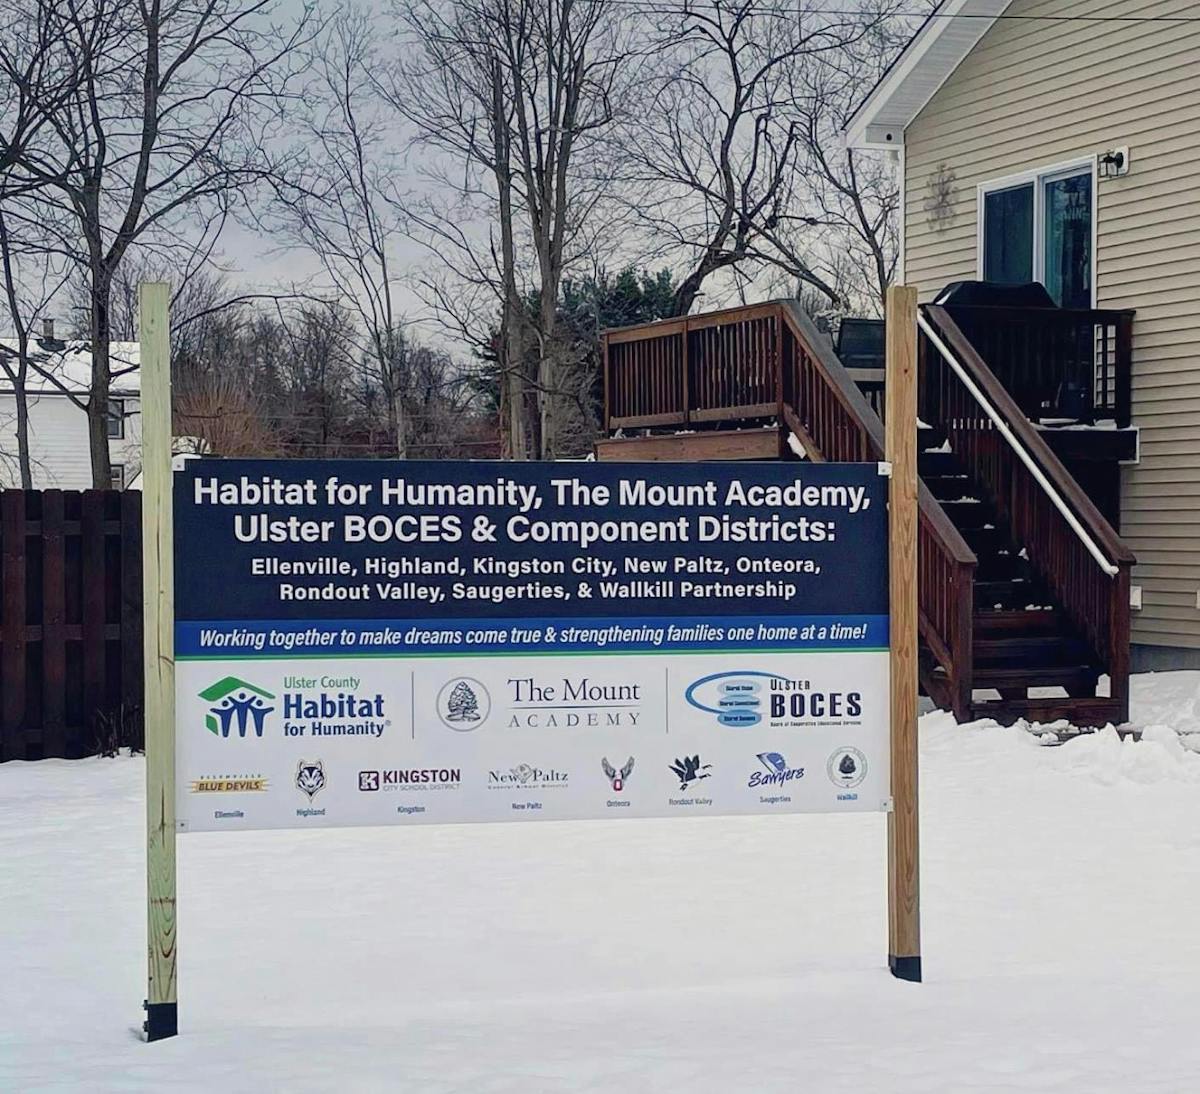 Catalano worked to create new signs, which explain their expanded partnership with all Ulster County Public Schools, The Mount Academy, Ulster BOCES, and Ulster Habitat for Humanity.